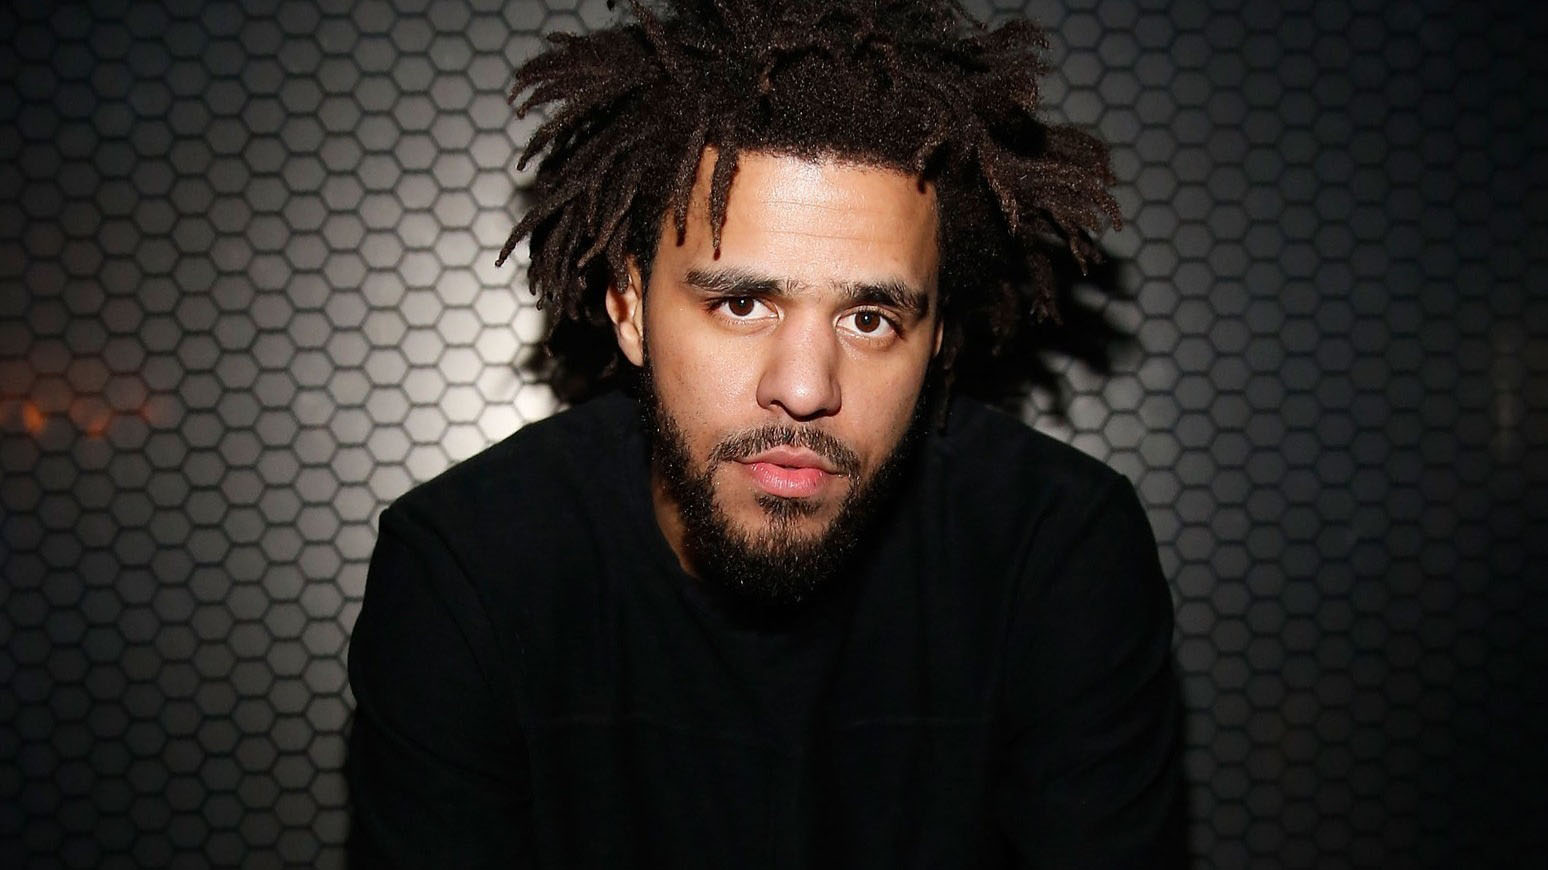 Jermaine Lamarr Cole (born January 28, 1985) known professionally as J. Cole, is an American rapper, singer, songwriter, and record producer. Cole is ...